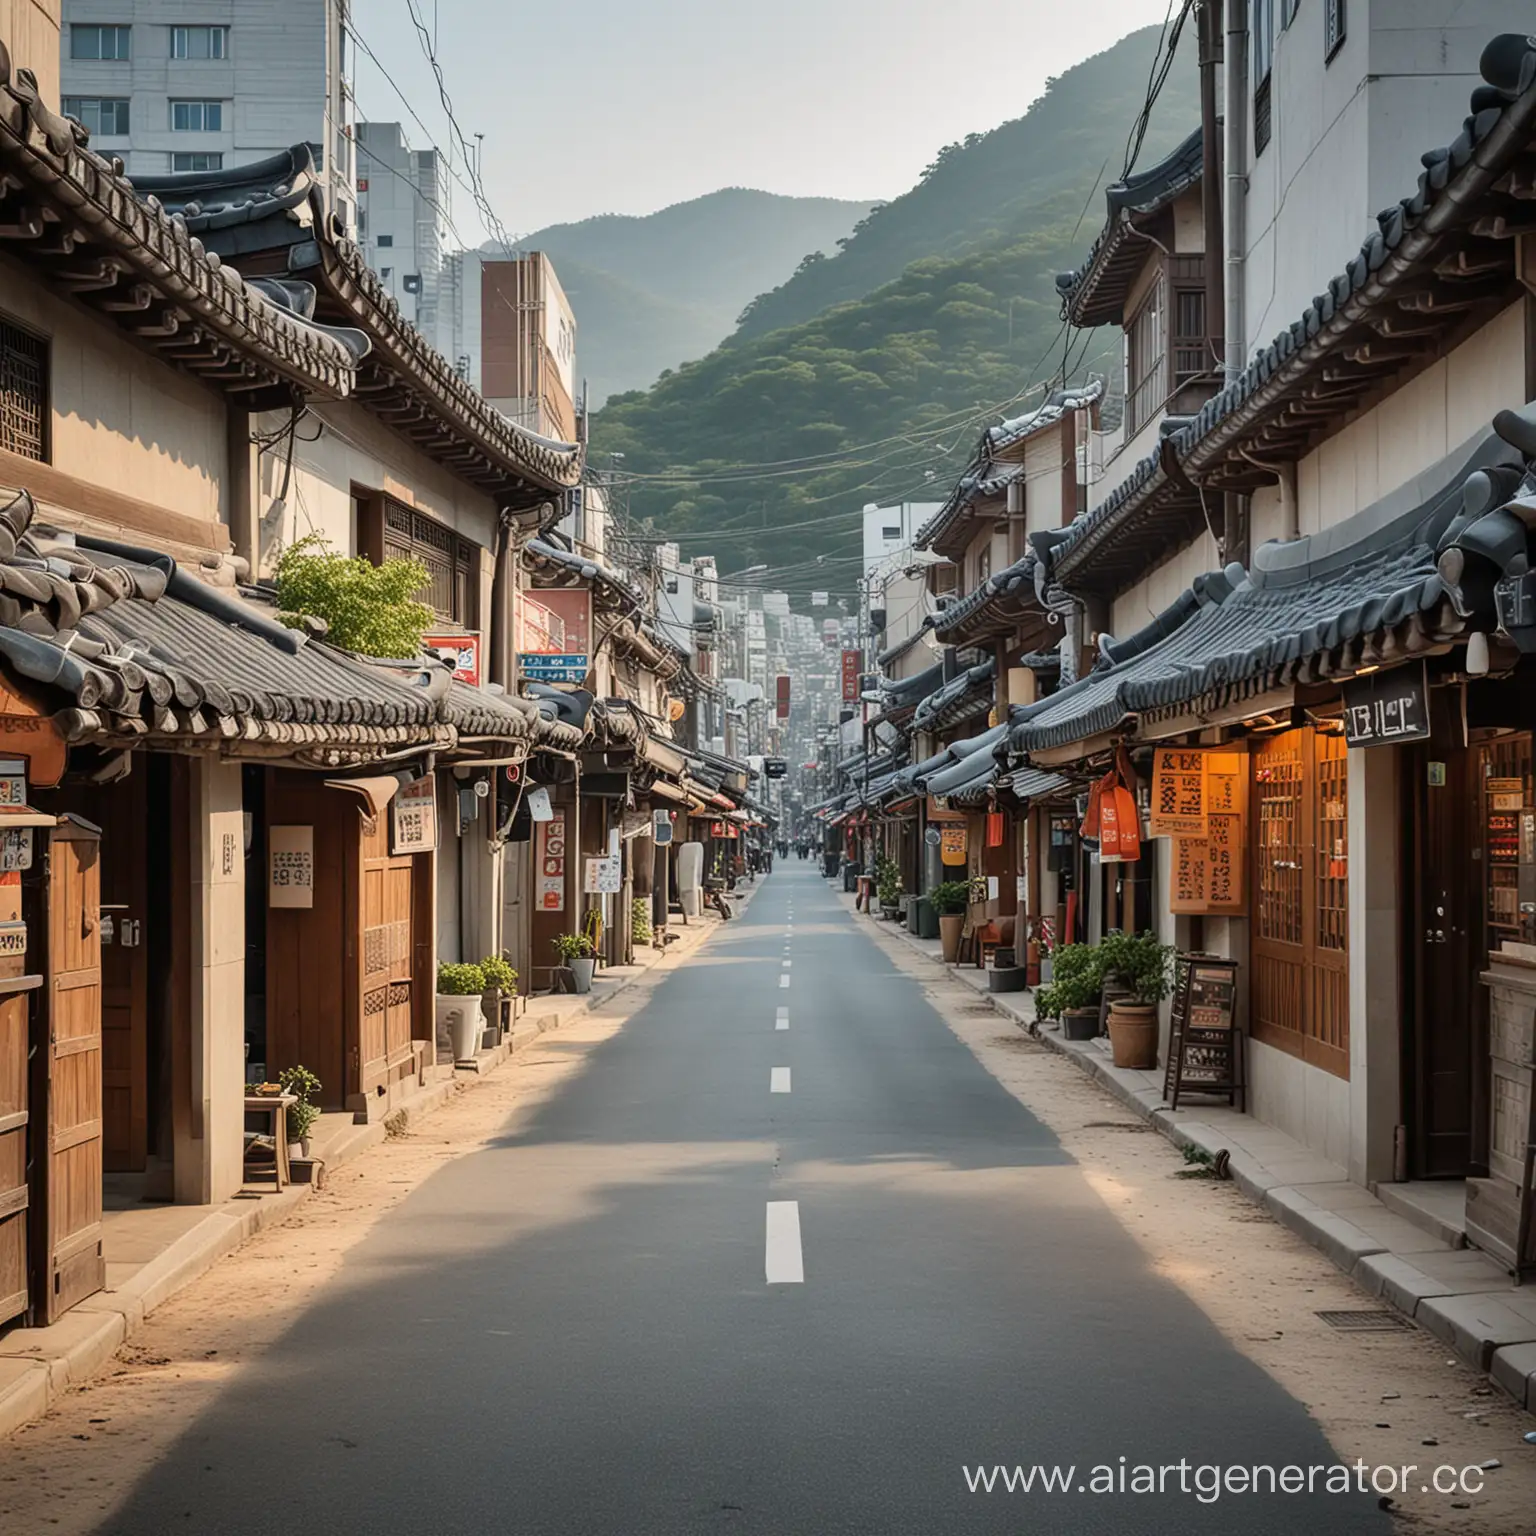 Vibrant-Scenes-of-Korean-Street-Life-Traditional-Architecture-and-Bustling-Markets